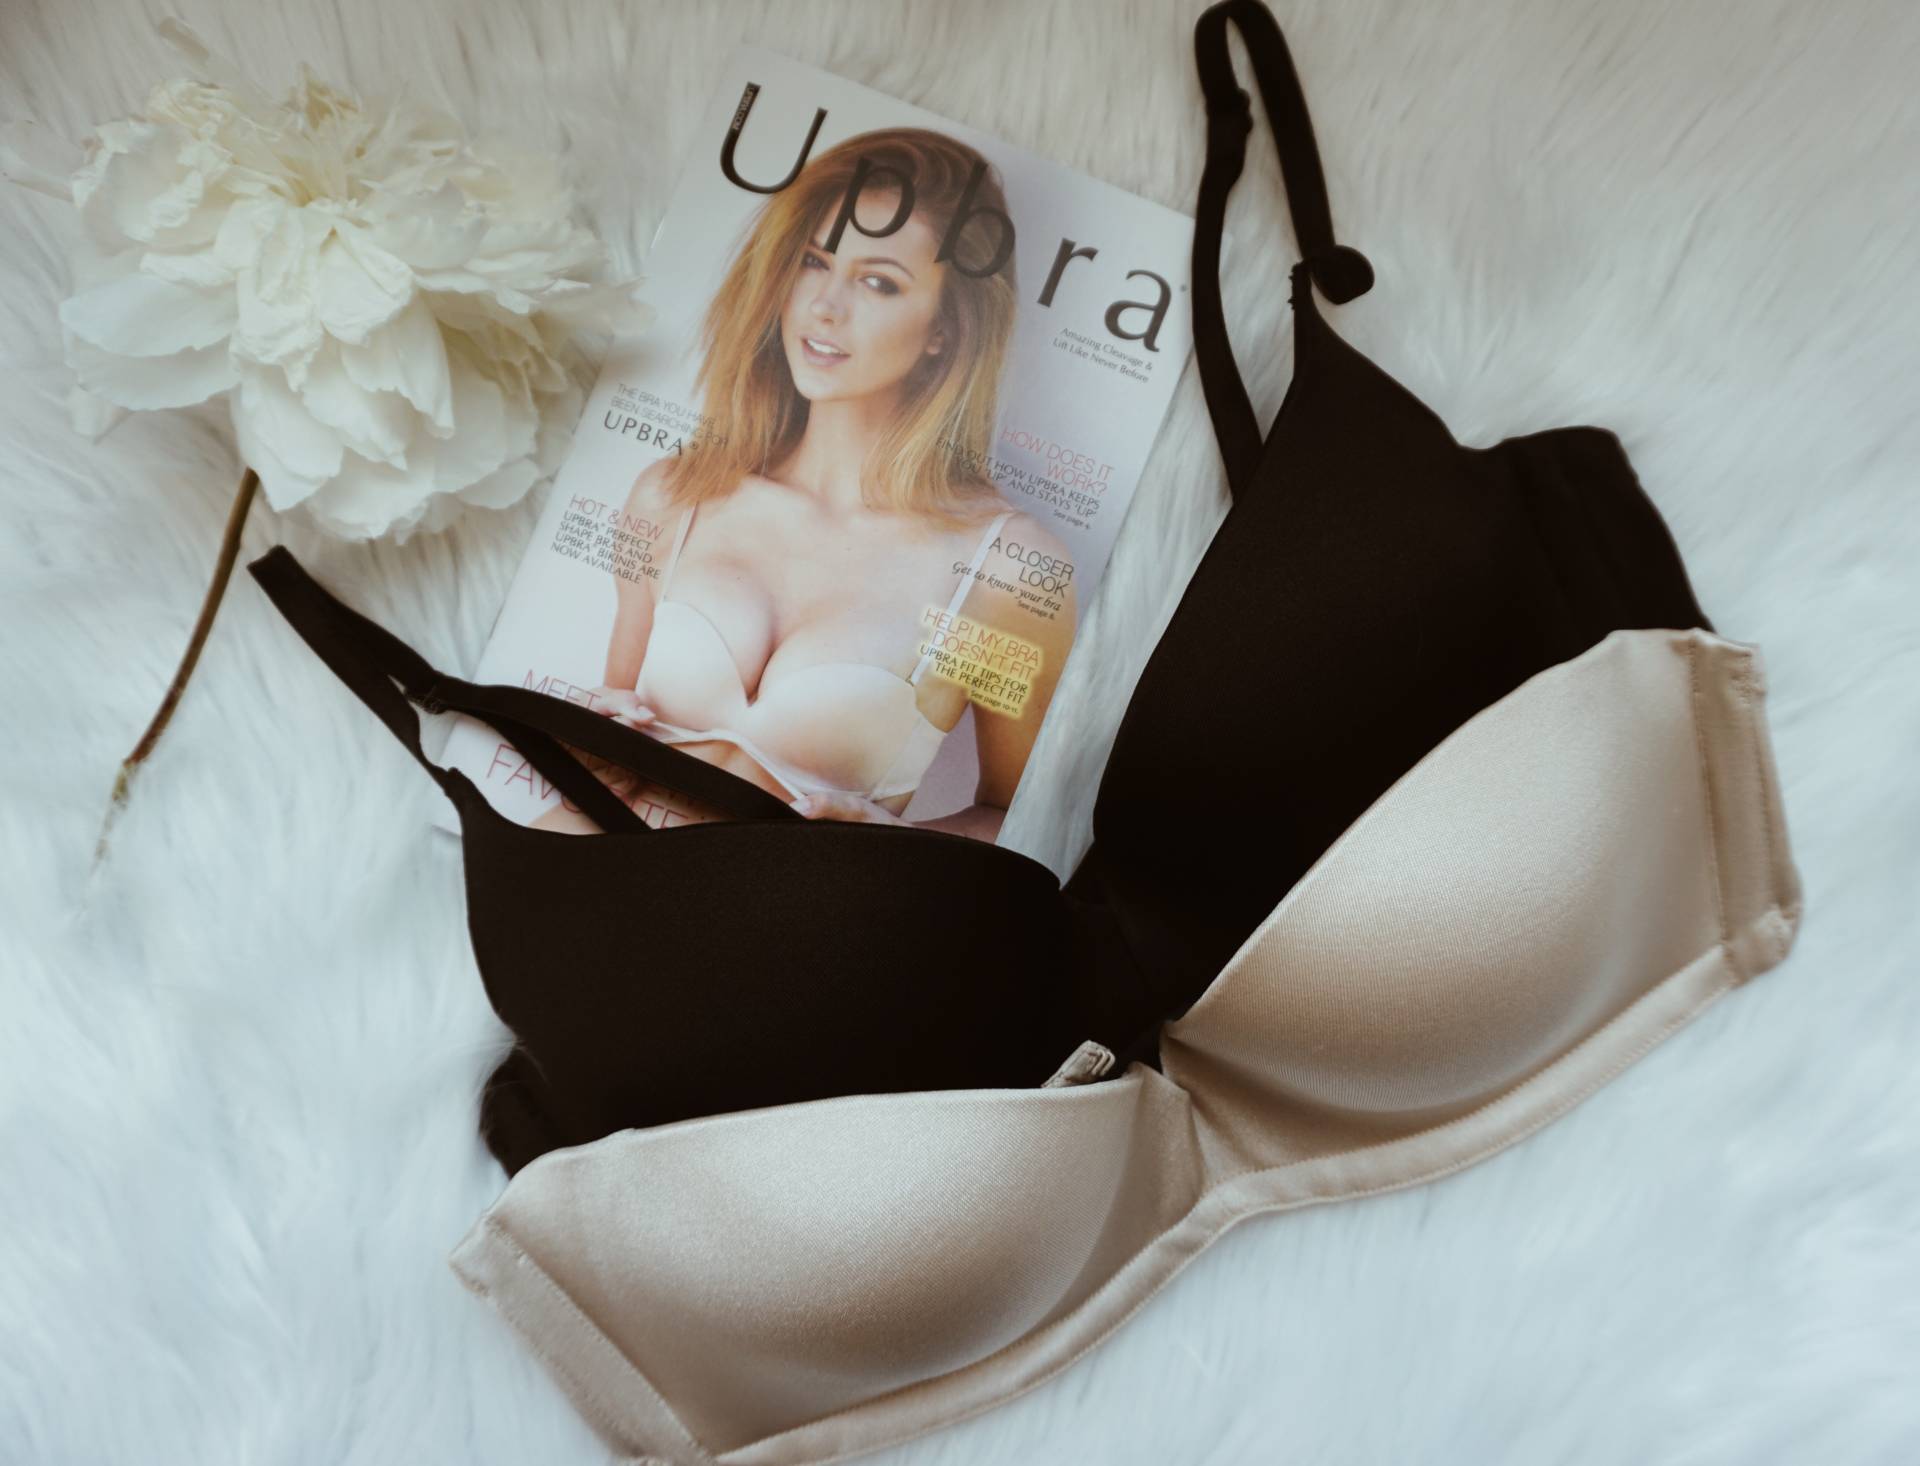 Give your Outfit a Boost! - Upbra Review - Le Fab Chic